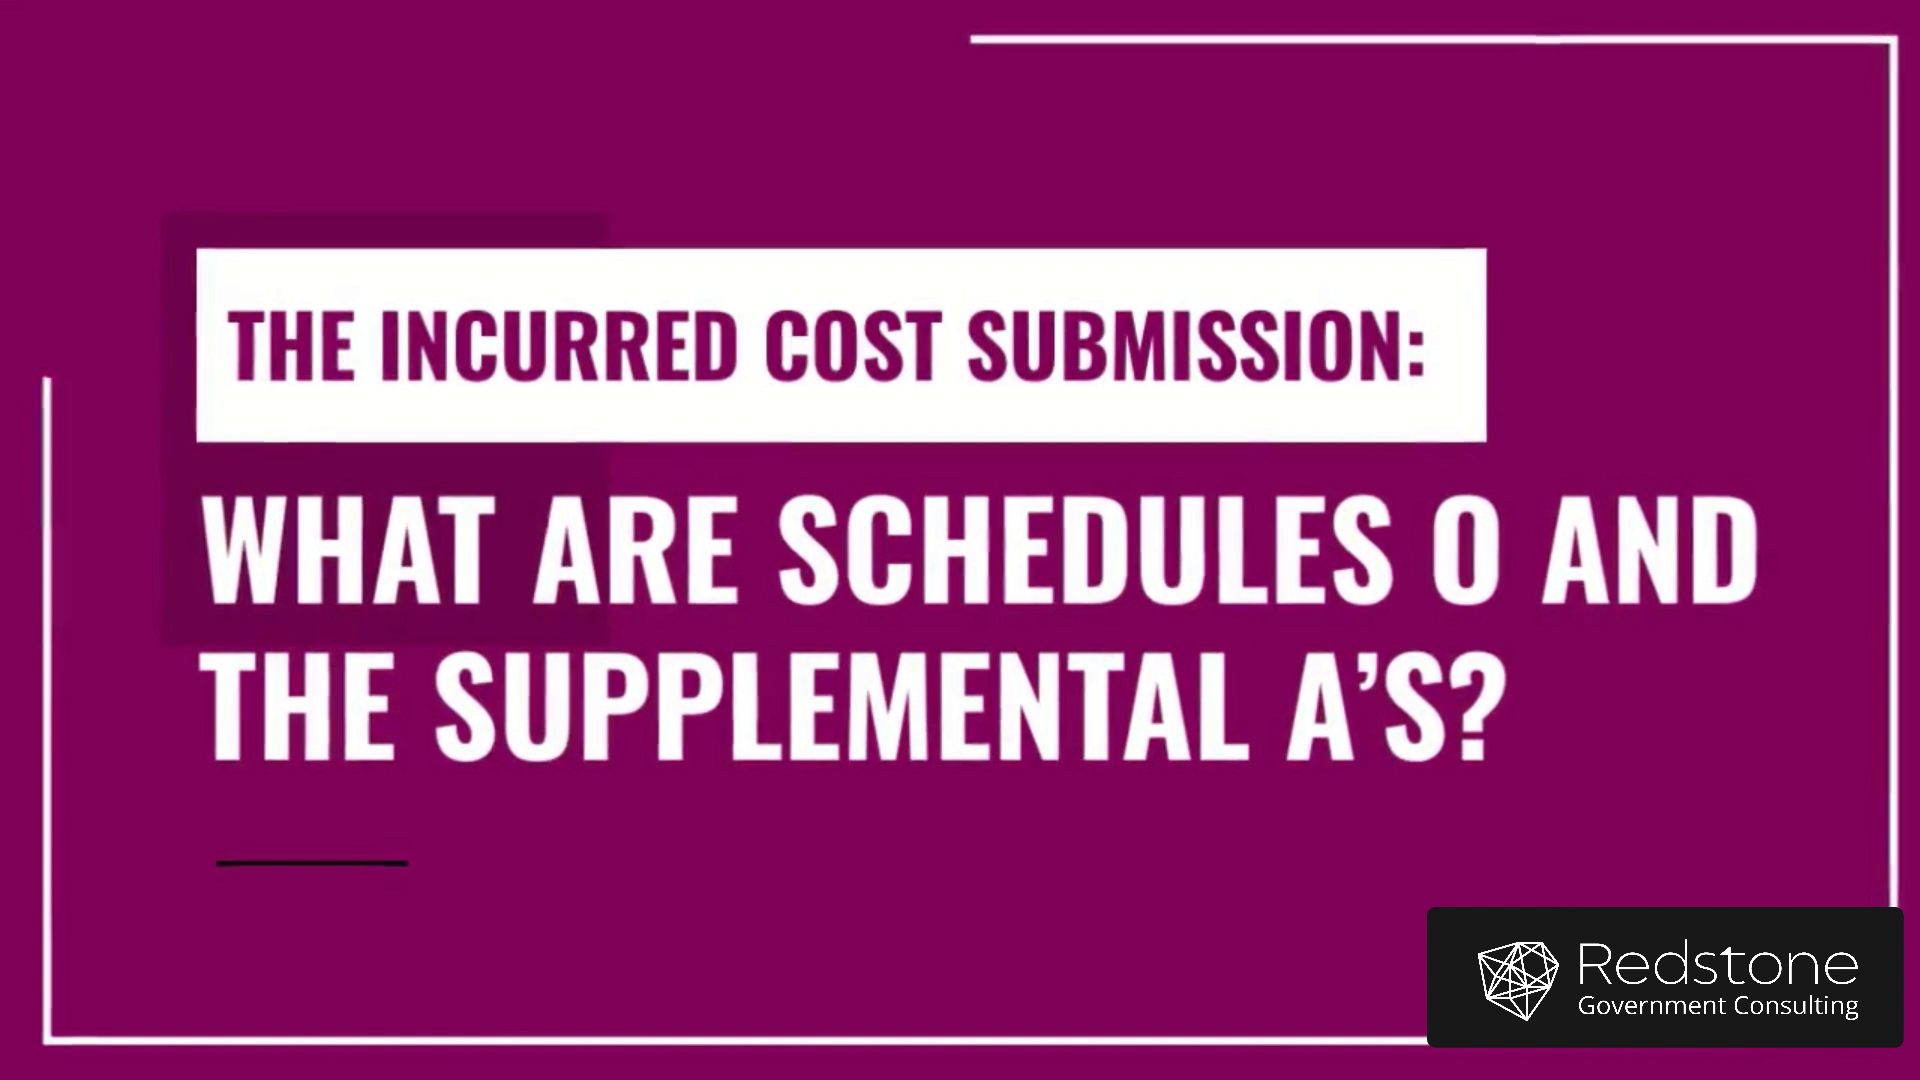 What are Schedules O and the Supplemental A’s in the Incurred Cost Submission?